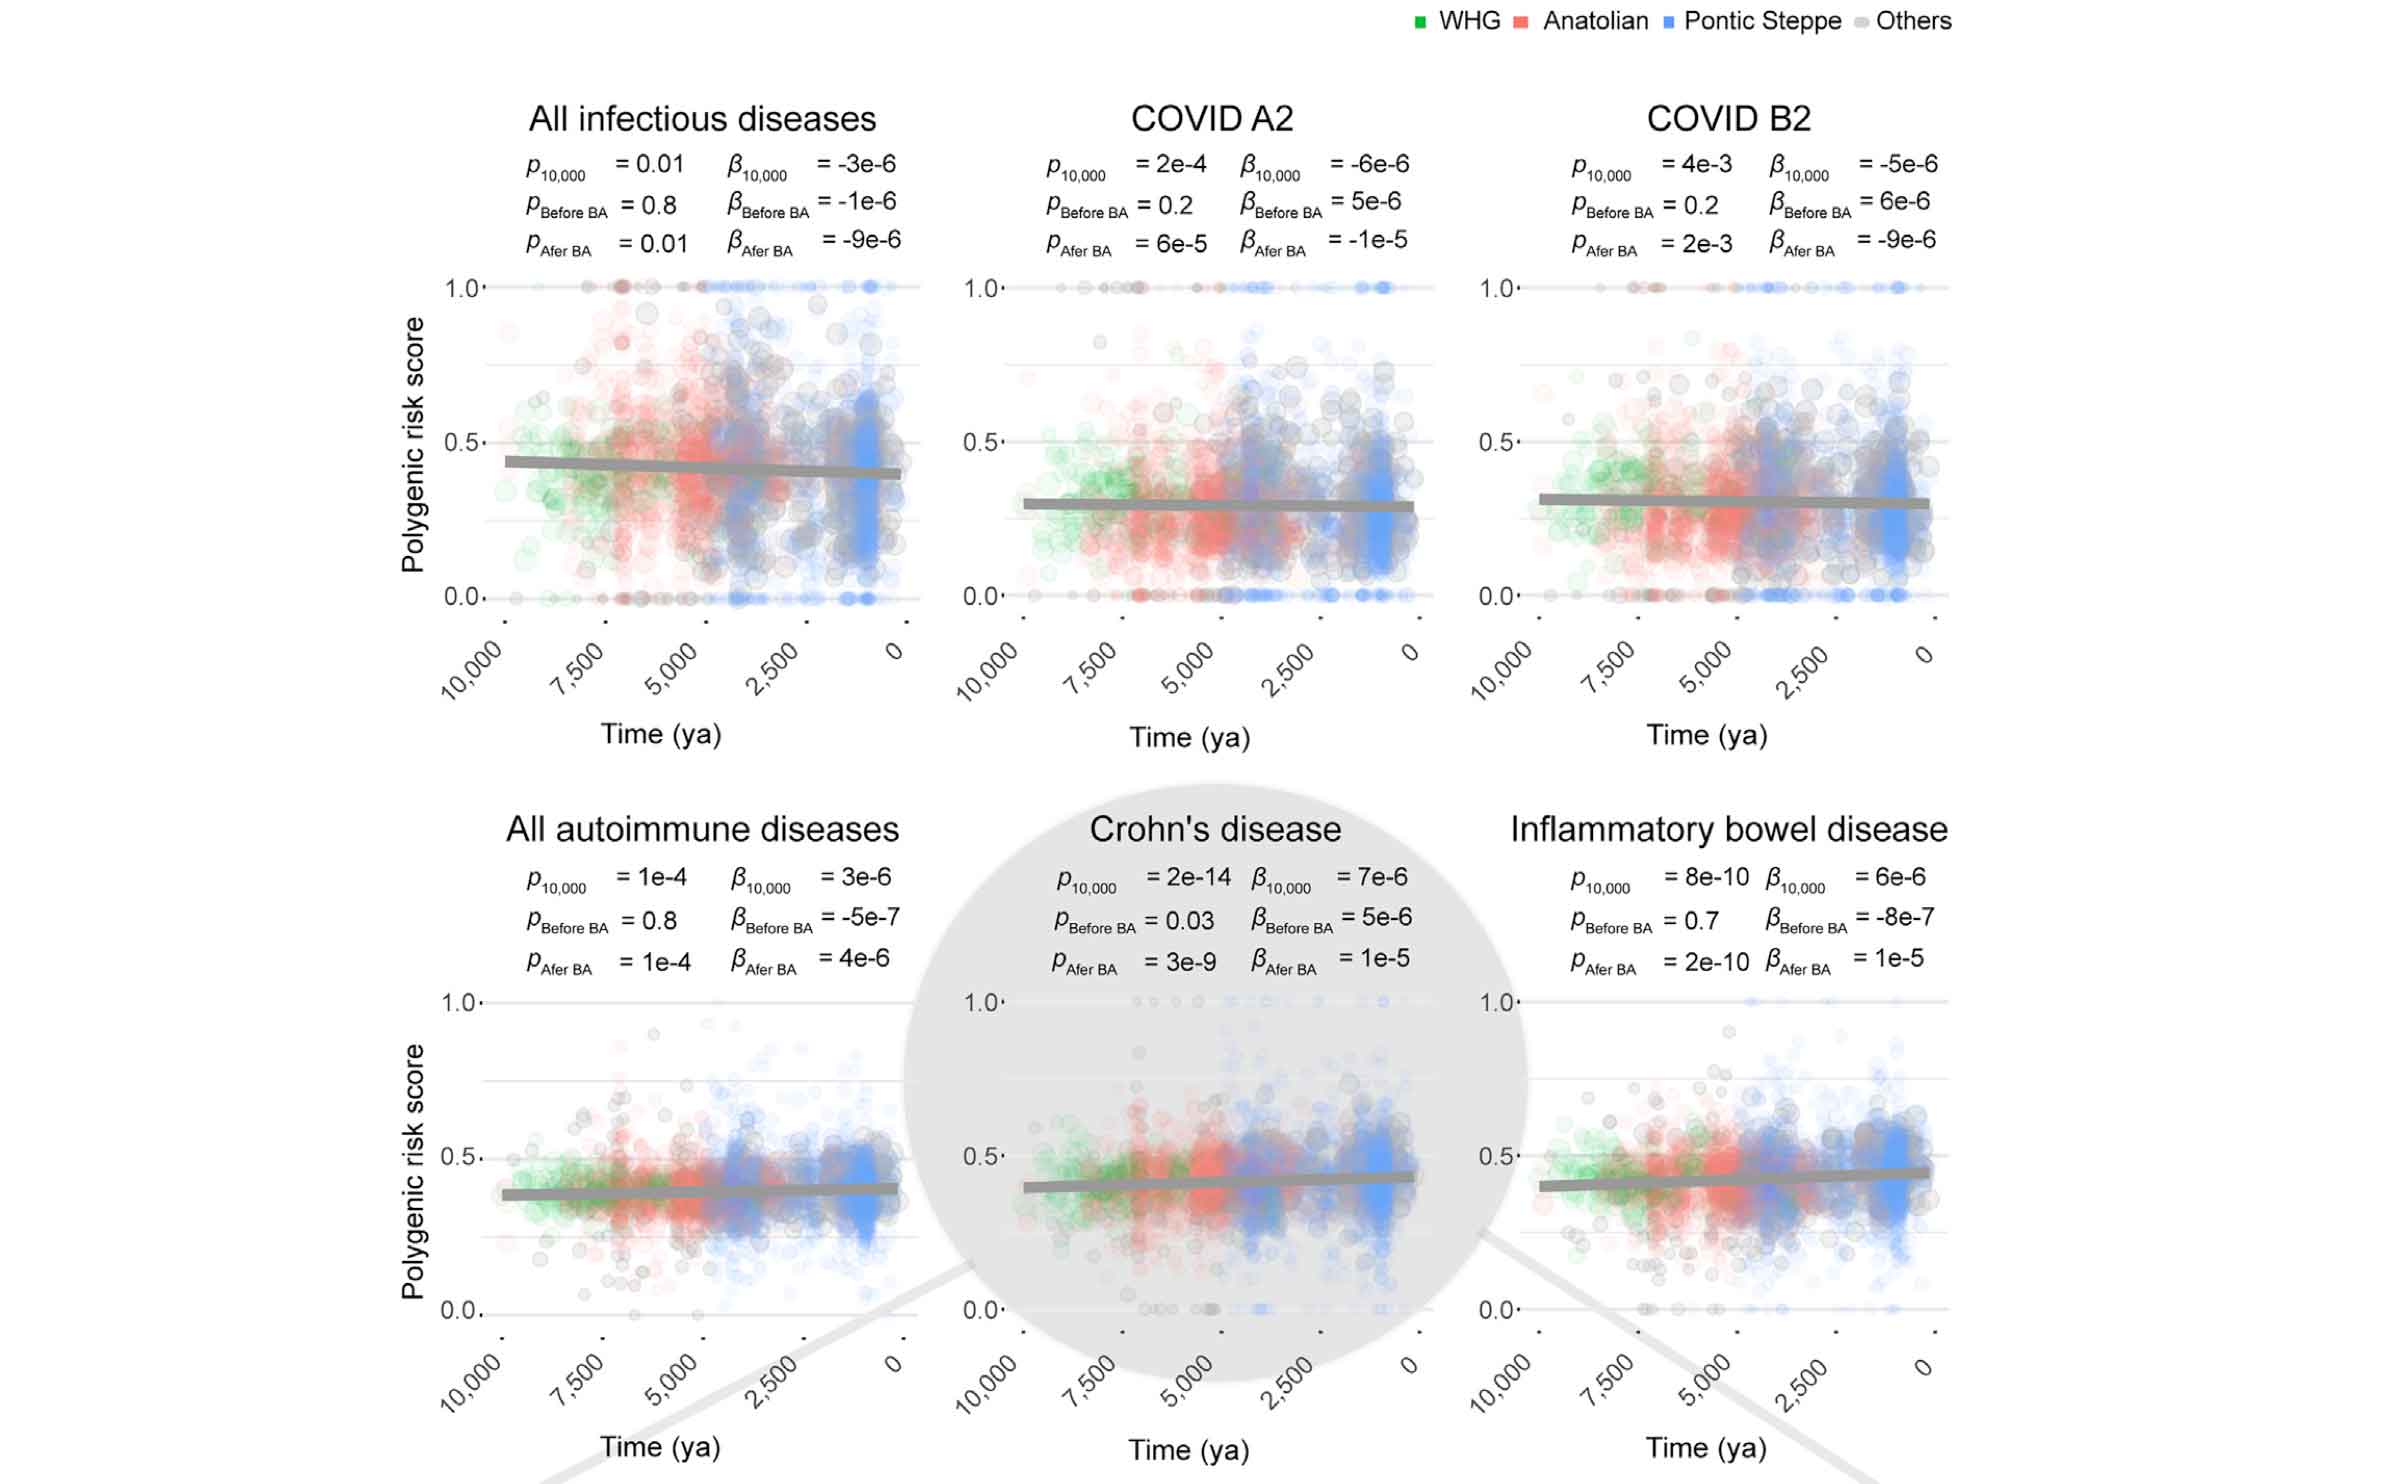 Six graphs showing polygenic risk score of ancient individuals across the last 10,000 years. From top left, the graphs show all infectious diseases, COVID A2, COVID B2, all autoimmune diseases, Crohn's disease, and inflammatory bowel disease. 